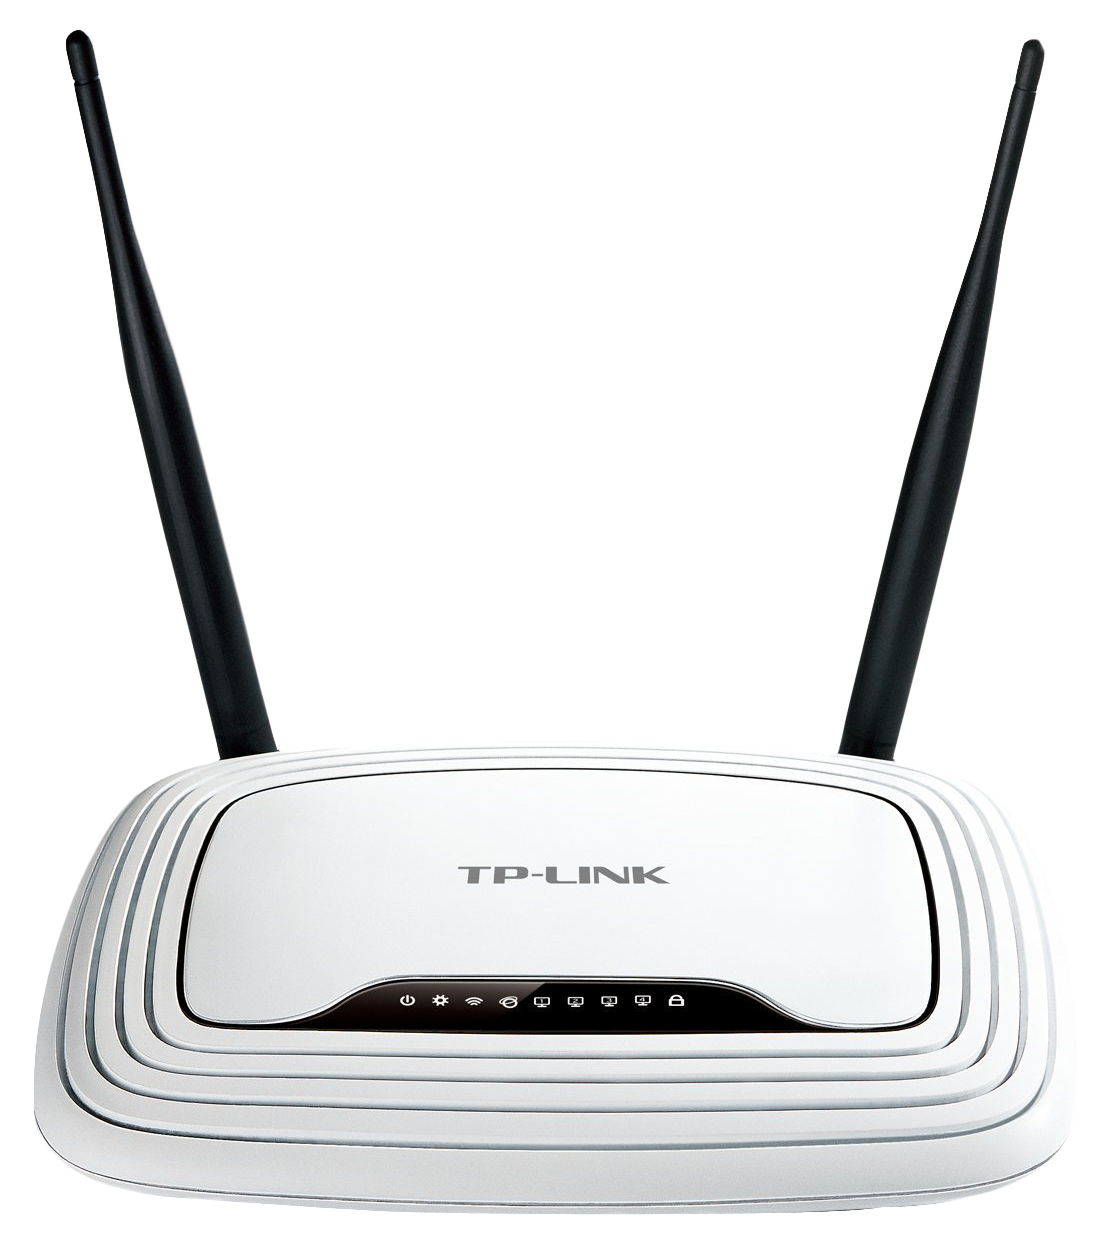 Router PNG Image